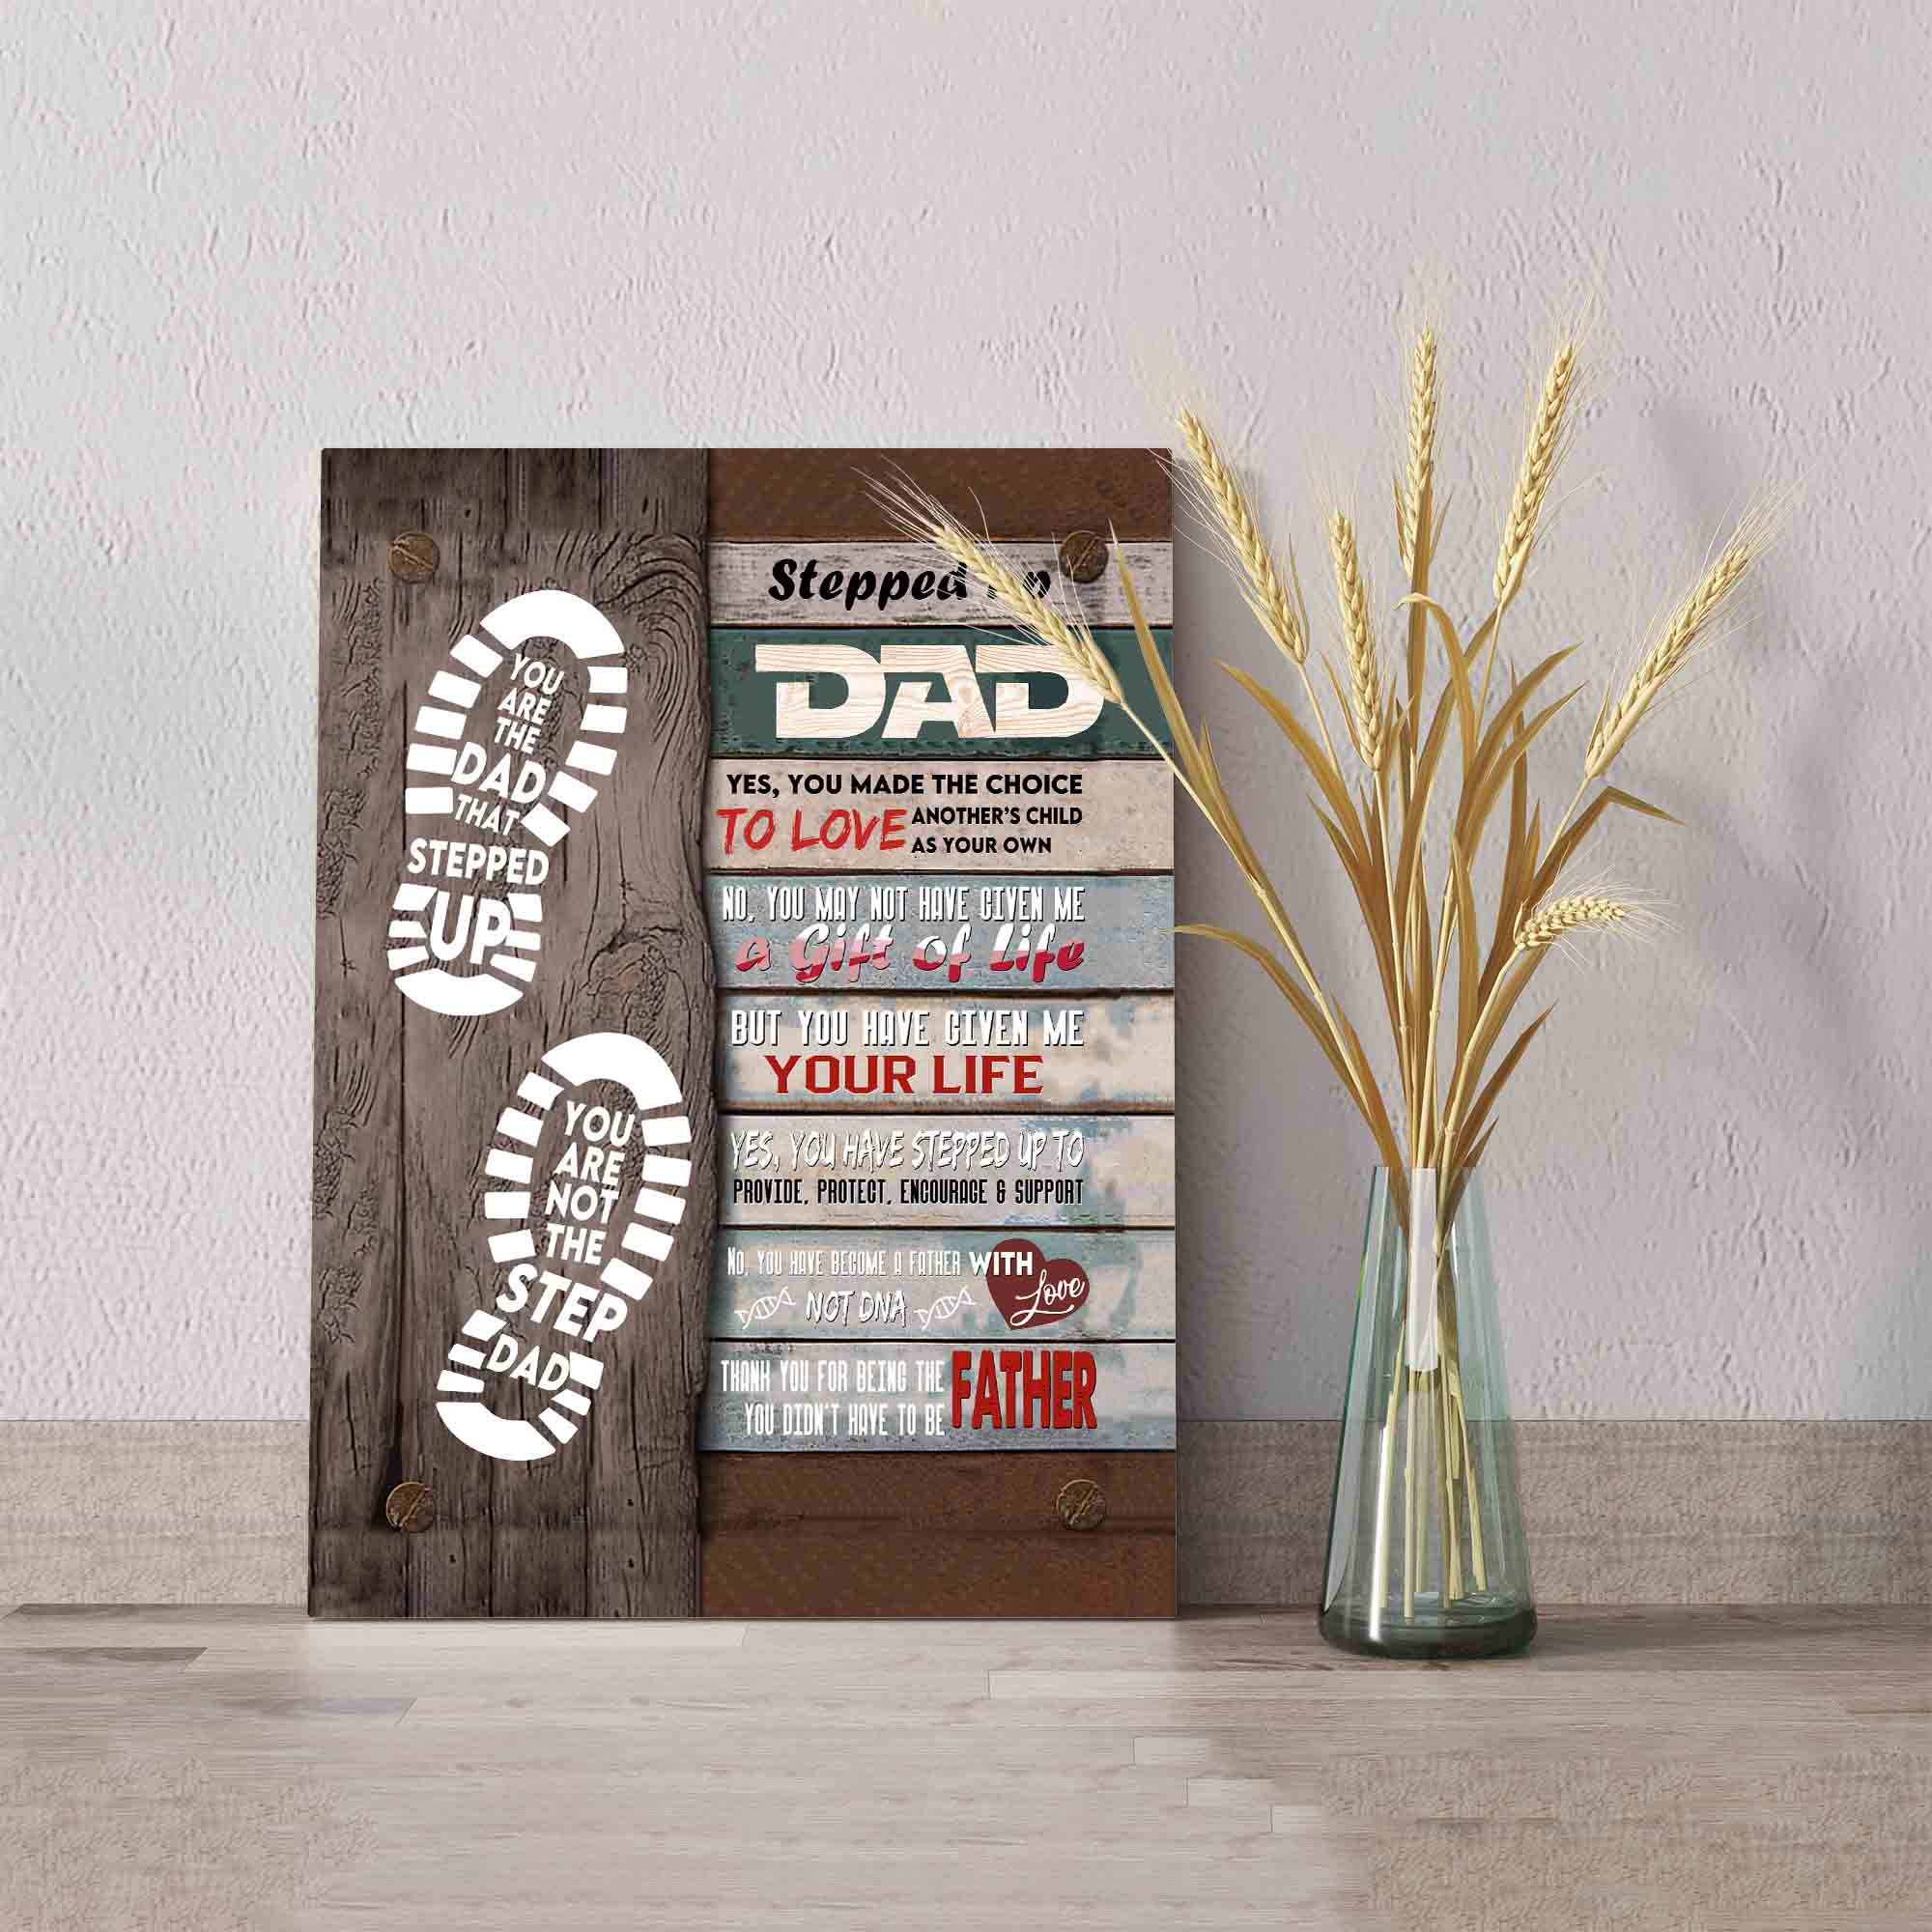 Stepped Up Dad Canvas, Dad Canvas, Footprint Canvas, Family Canvas, Wall Art Canvas, Gift Canvas